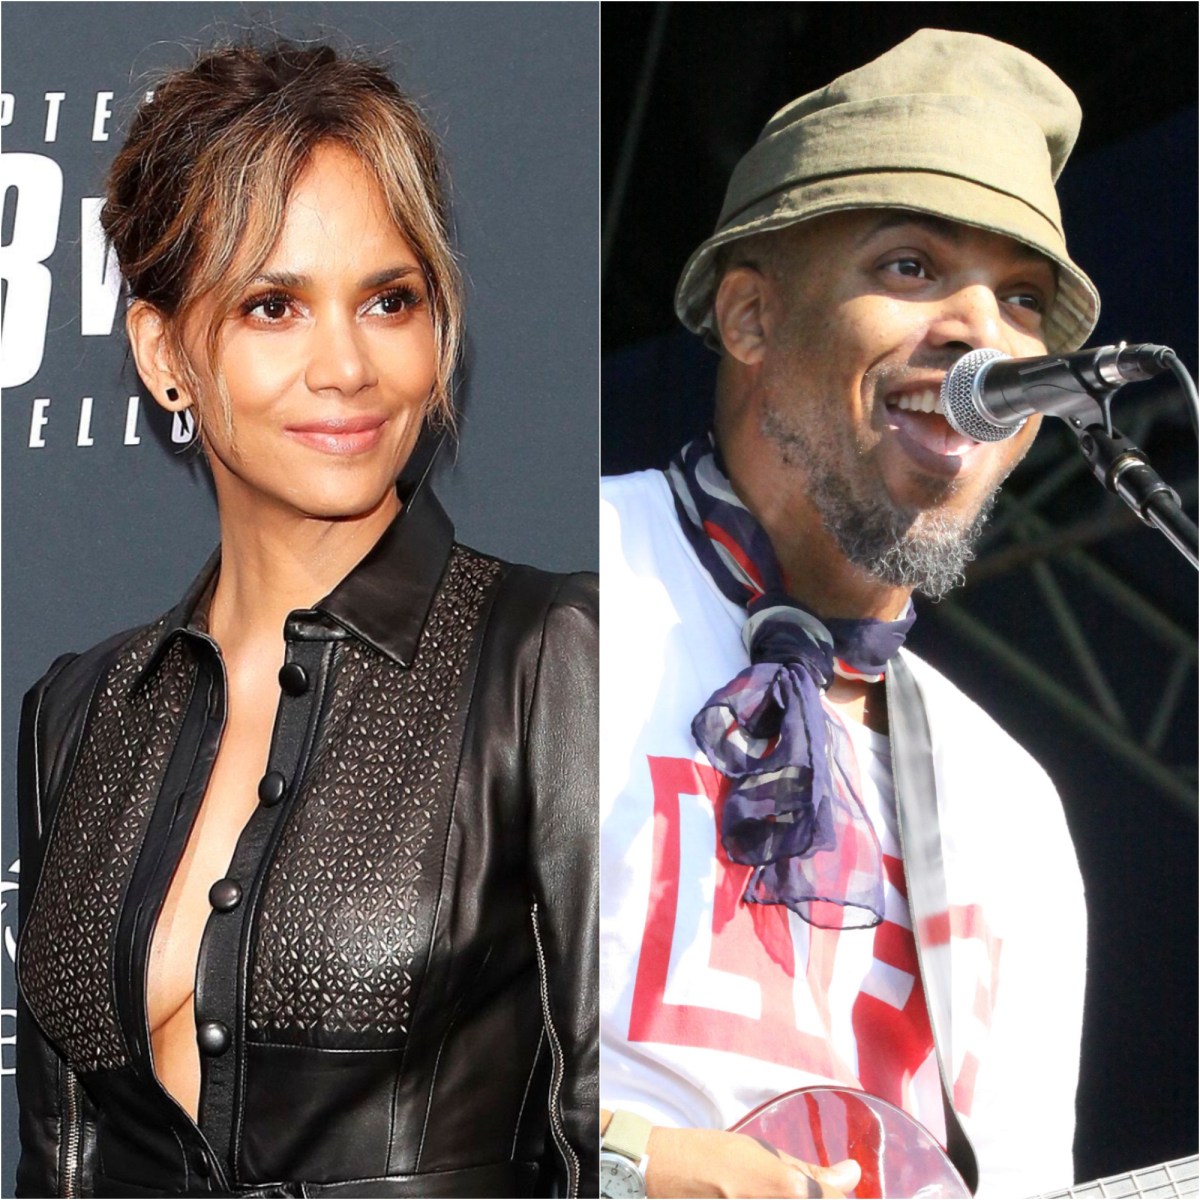 Halle Berry Is Happier Than Ever With Her Boyfriend and Kids